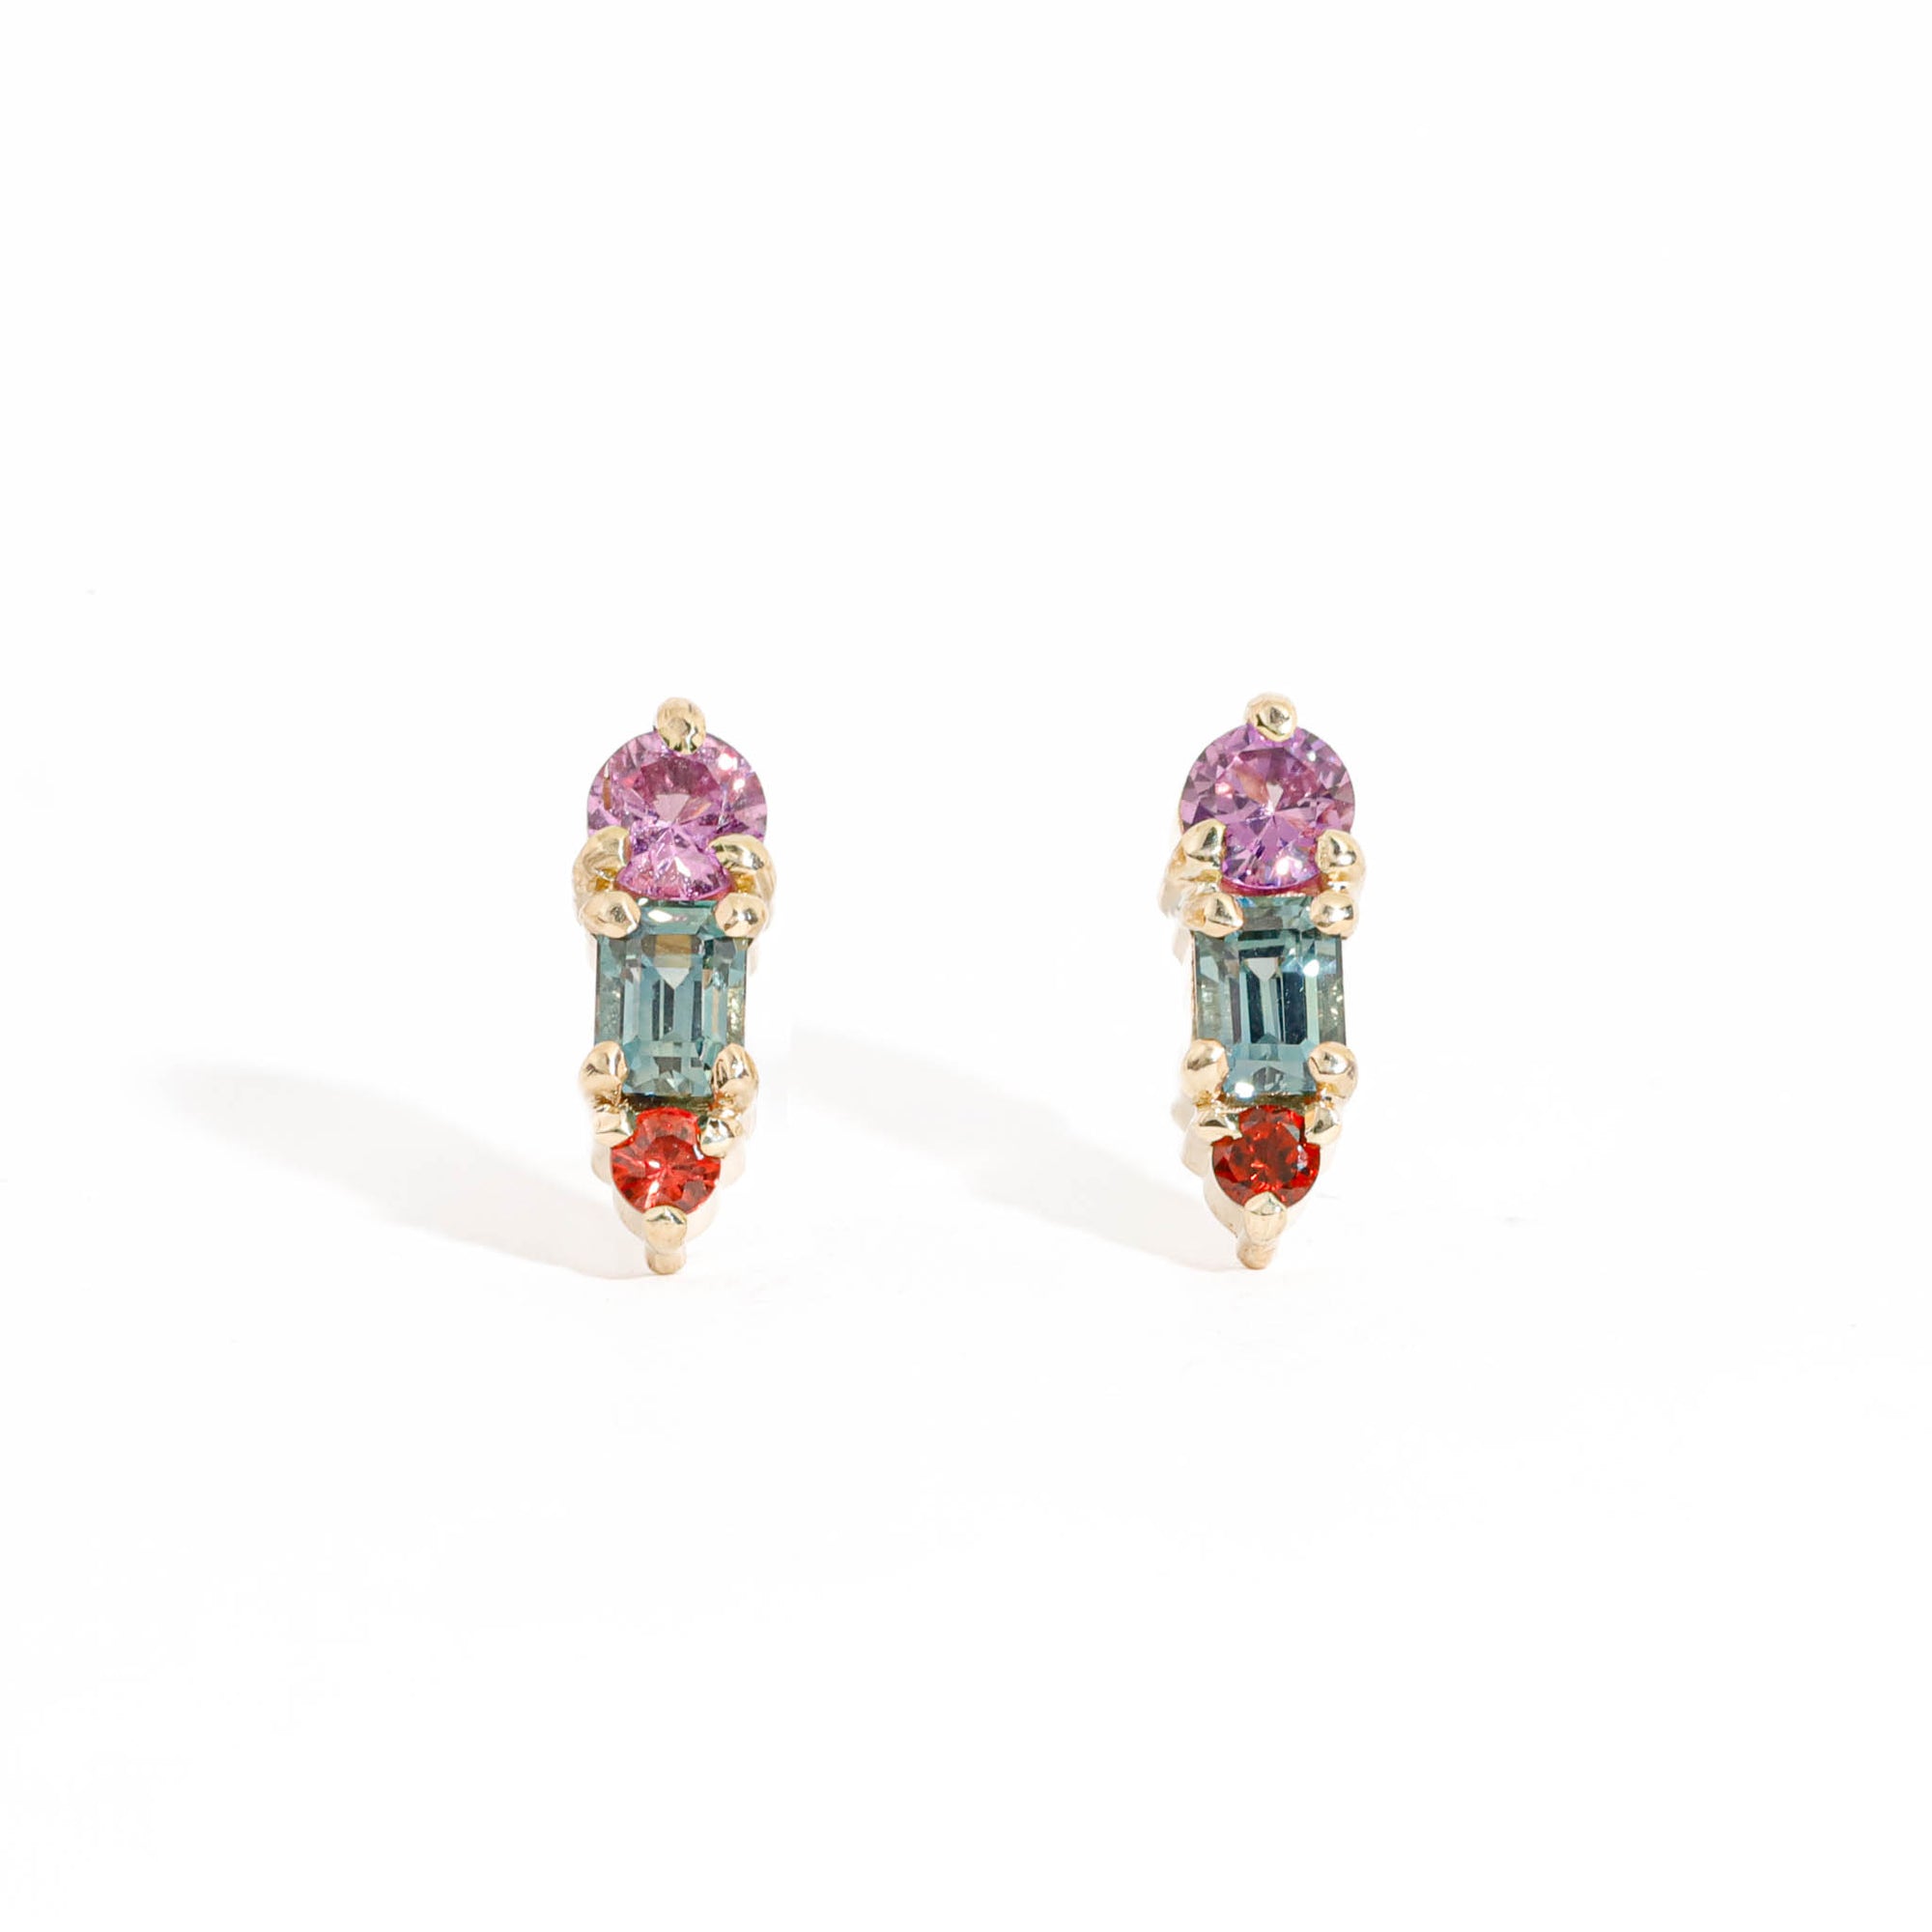  Round Cut Pink Sapphire, Round Cut Orange Sapphire and Emerald Cut Teal Sapphire Drop Earrings in 9 Carat Yellow Gold 